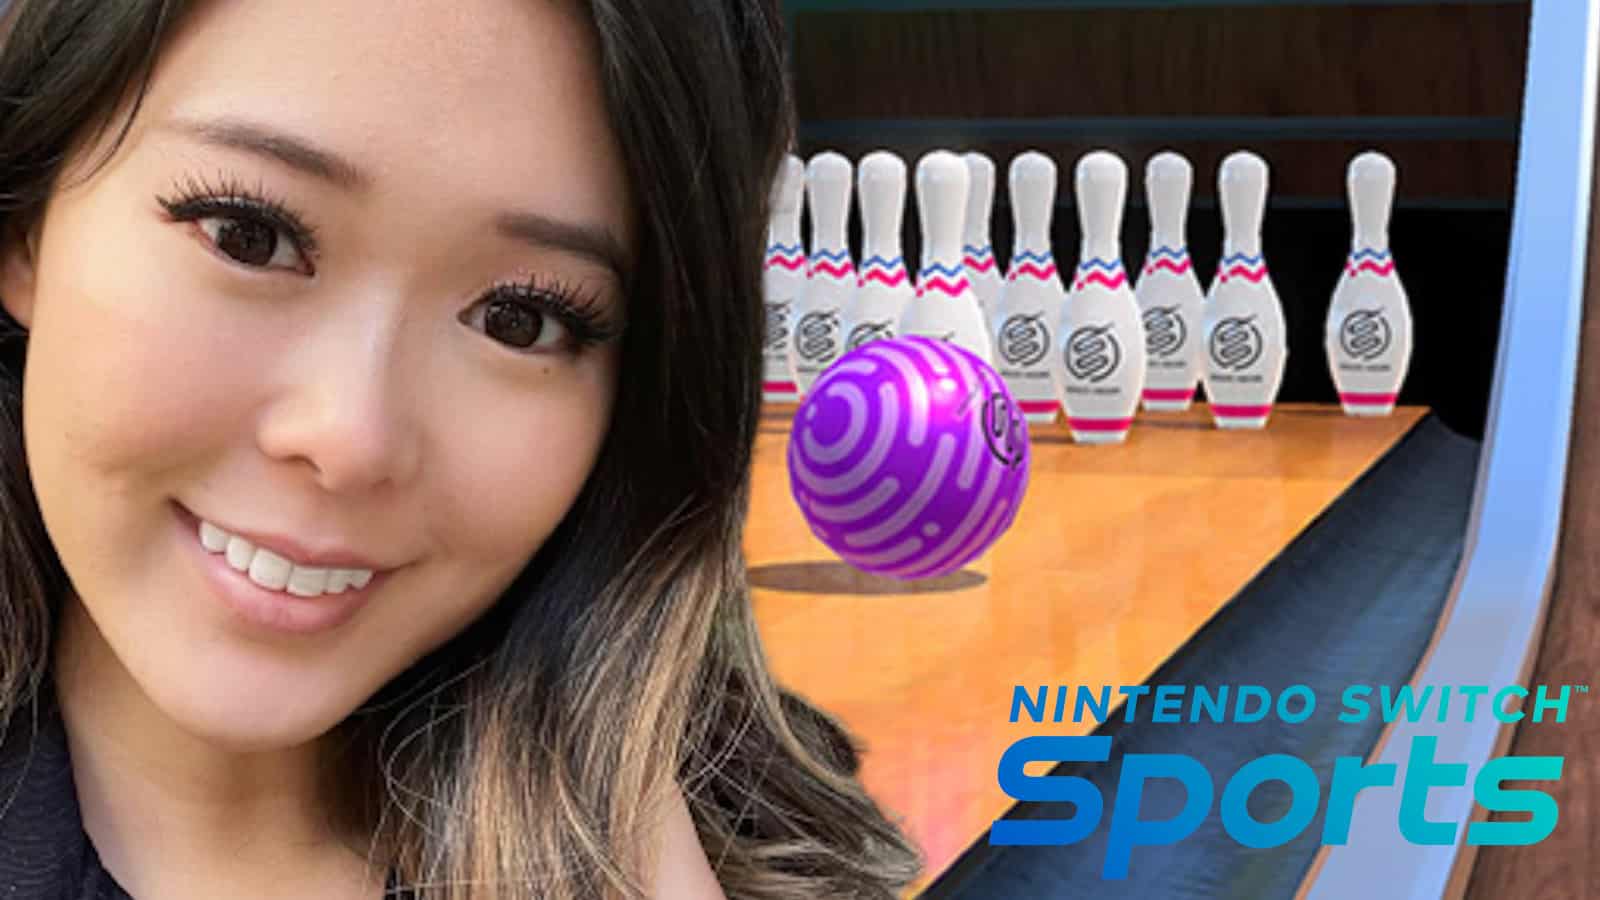 ExtraEmily bowls a 300 in Switch sports